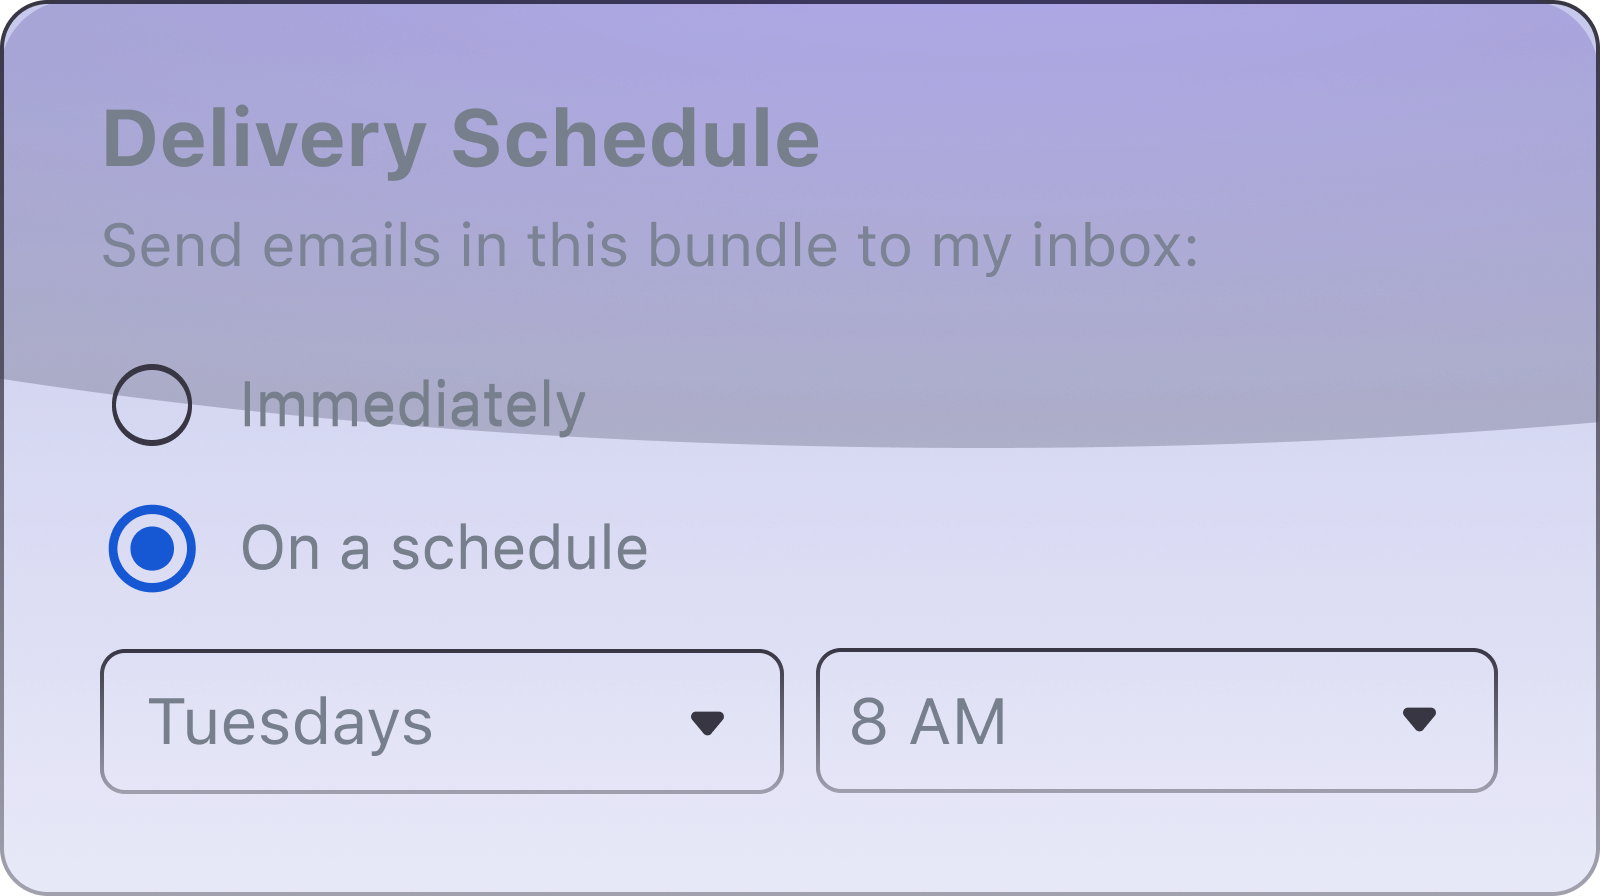 A modal titled 'Delivery Schedule' with description 'Send emails in this bundle to my inbox' with two radio options 'Immediately' and 'On a schedule' the latter of which has two dropdowns to select a day and time